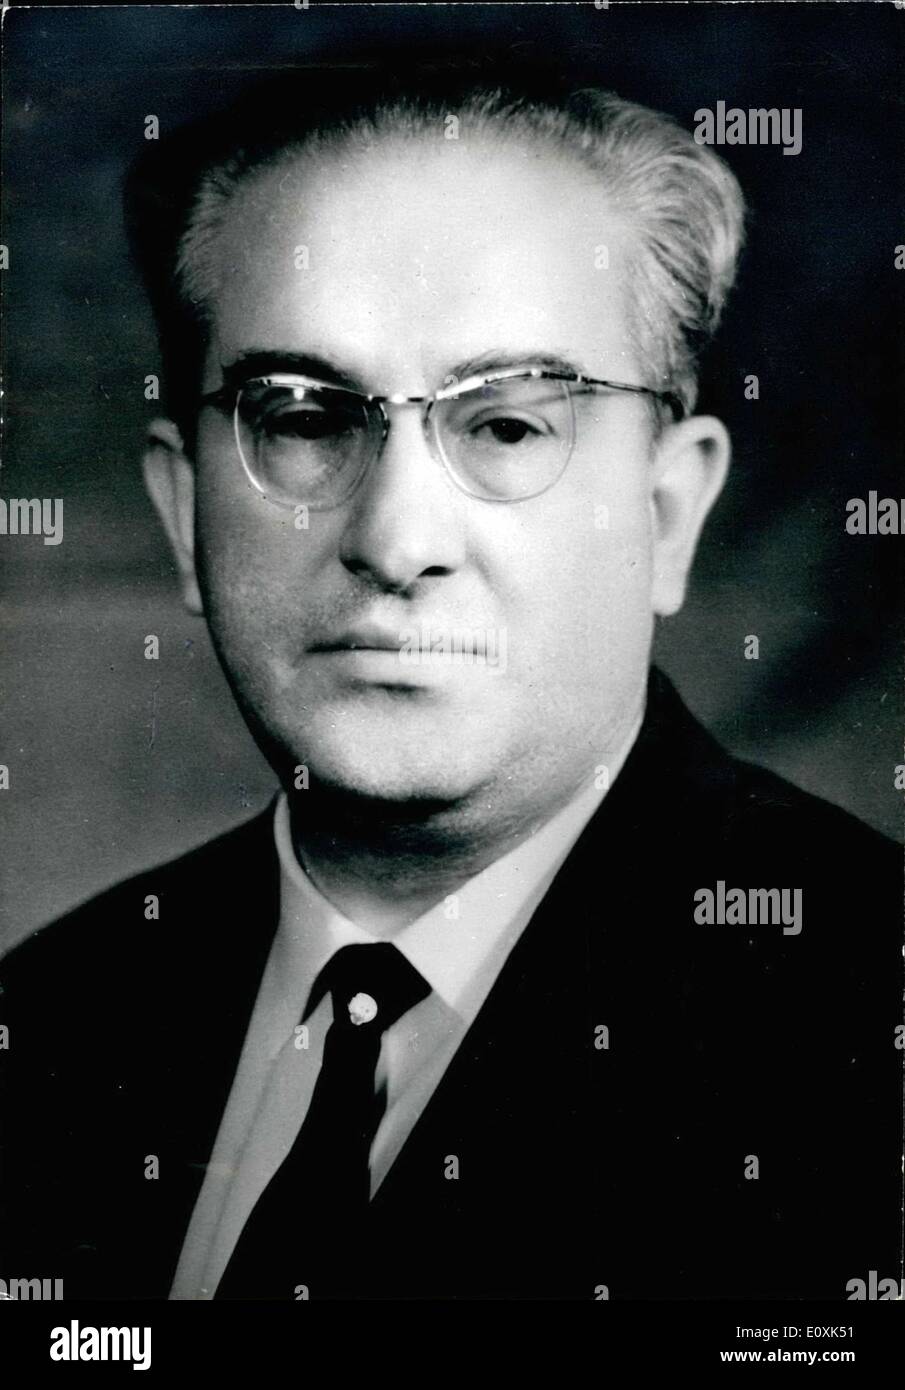 May 05, 1967 - Soviet Chief Of Secret Police Fired-Andropov Takes Over: Reports From Moscow Announce Important Changes In The Soviet Secret Police. Vladimir Sichastny, The Former Chief, Has Been Replaced By Yuri Andropov. The Changes, It Is Thought, Have Something To Do With The Escape From Russia Of Stalin's Daughter, Svetlana Alleluyeva. Photo shows A Recent Portrait Of Yuri Andropov, The New Chief Of The Soviet Secret Police. Stock Photo